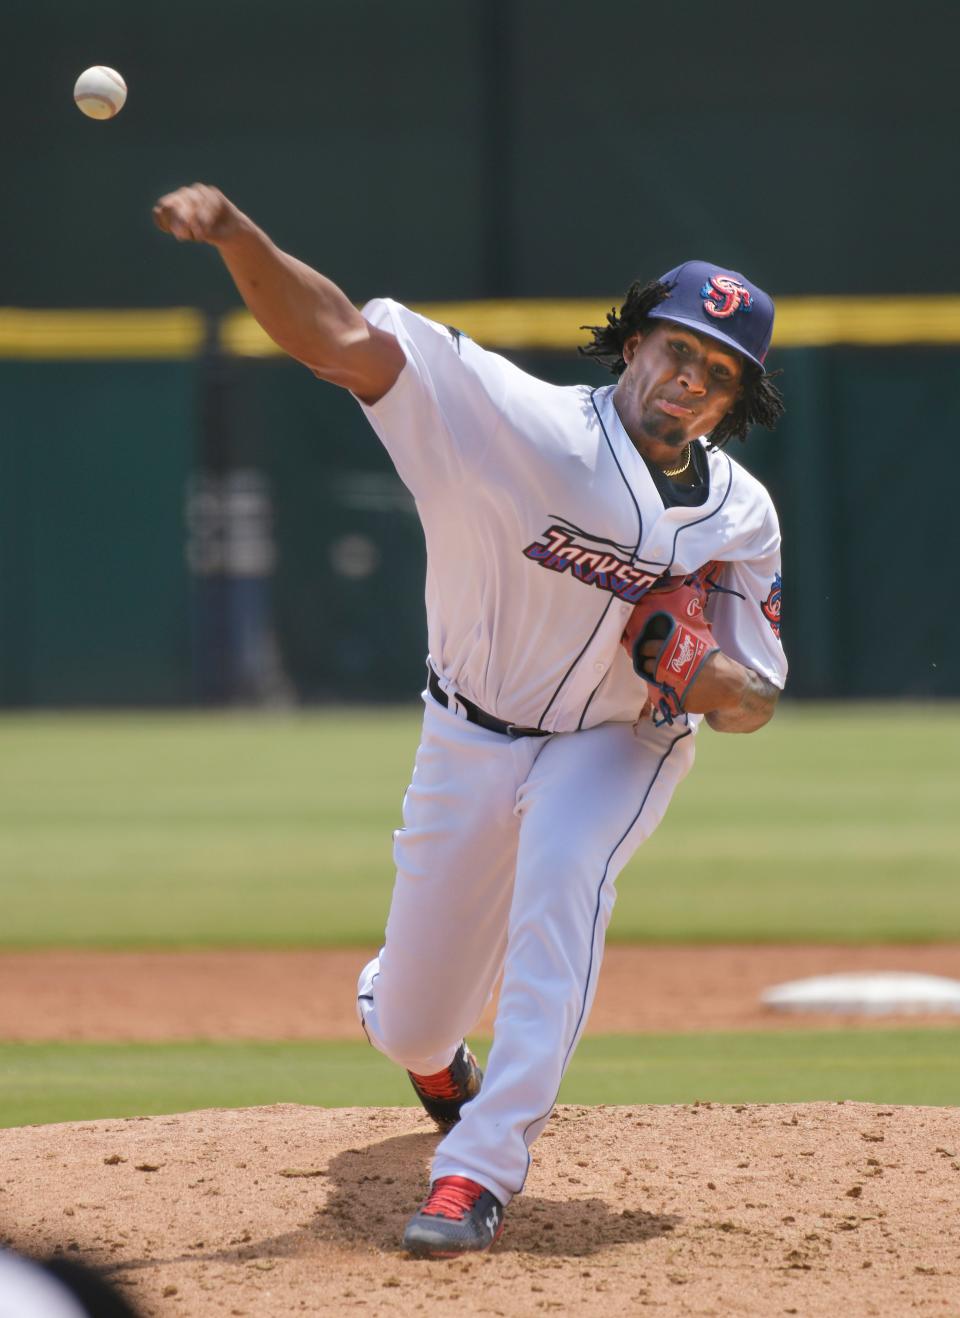 Jumbo Shrimp pitcher Sixto Sanchez, pictured in 2019, has been delayed in his return to action after injuries that have sidelined him since 2020.